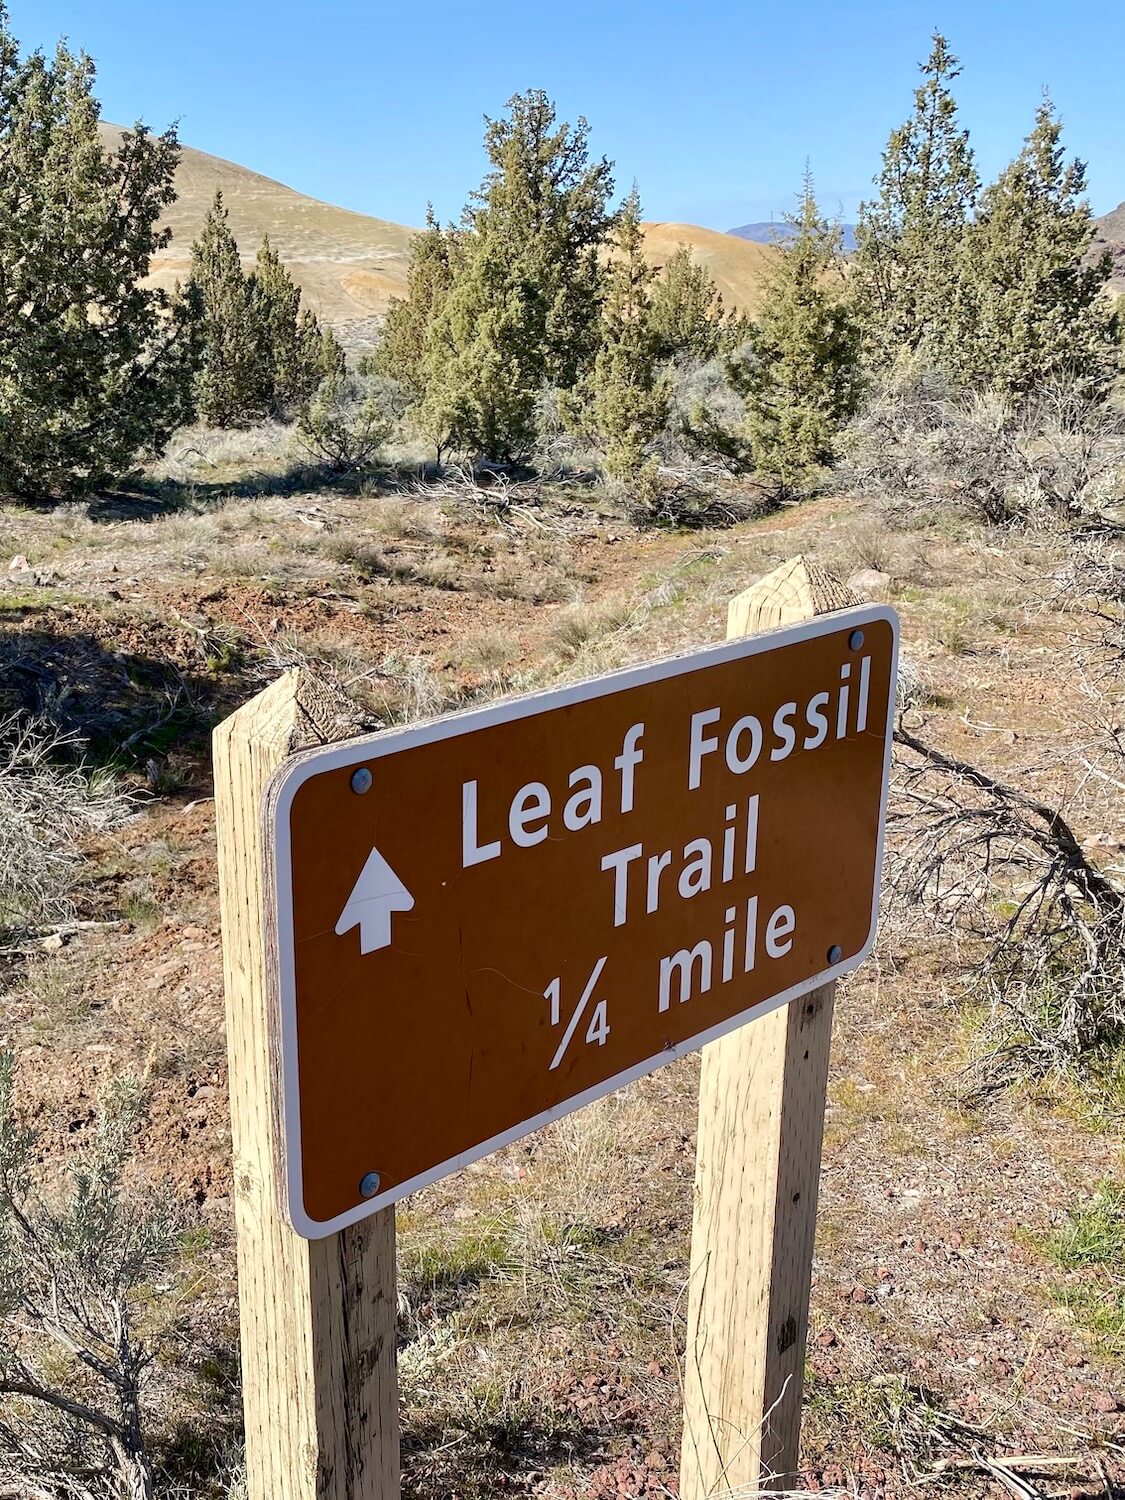 The brown sign at the Leaf Fossil Trail  points the way to the dry path surrounded by scraggly juniper bushes and trees. Rolling mounds of green with swirls of yellow rise up in the background. 